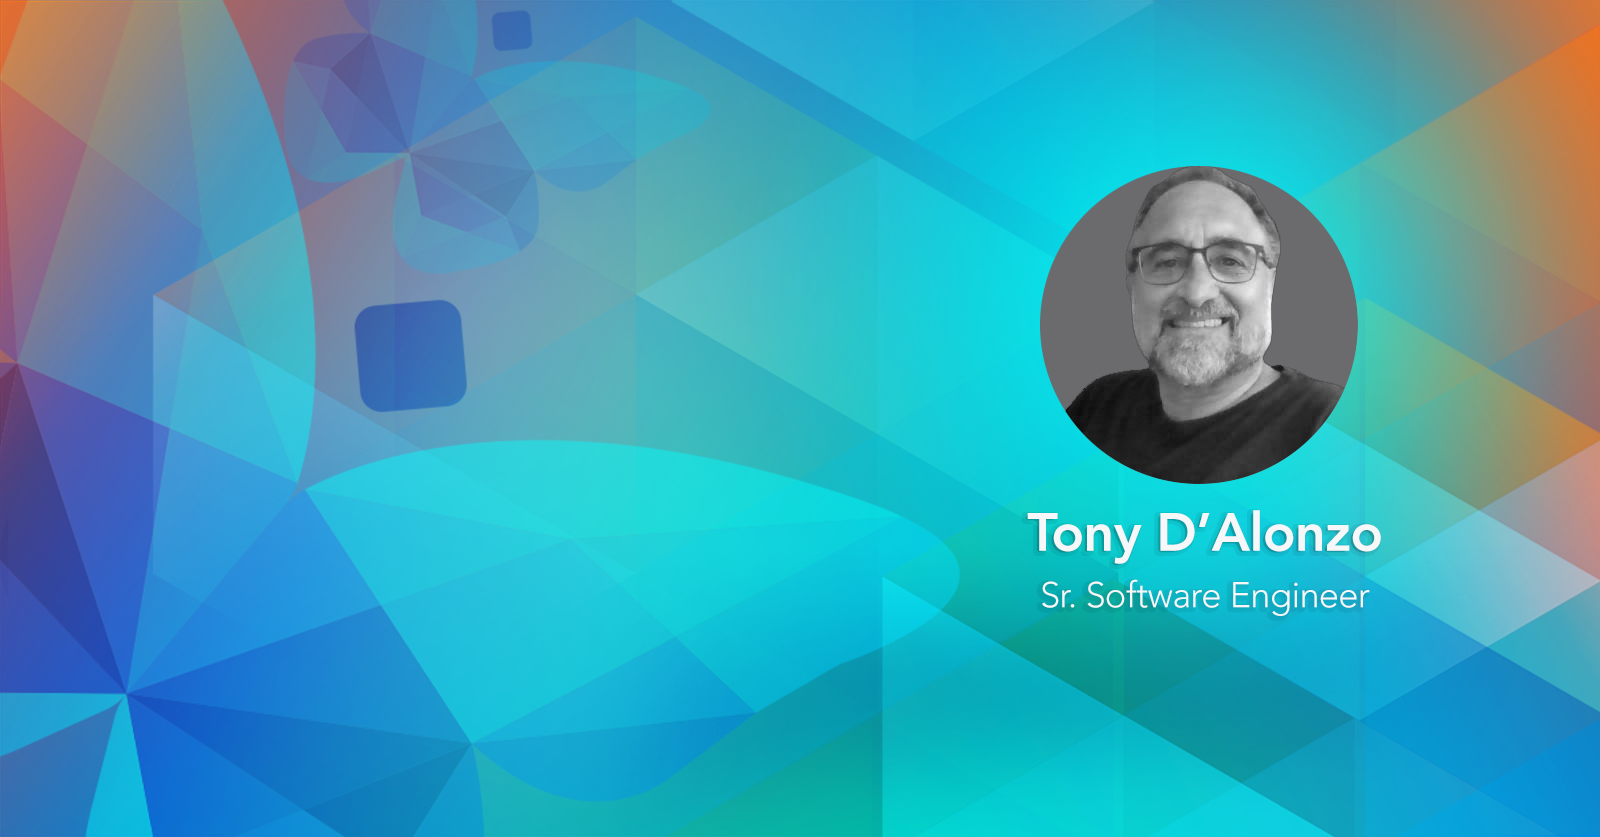 Tony D’Alonzo: Coder, Philosopher, and Man of Value